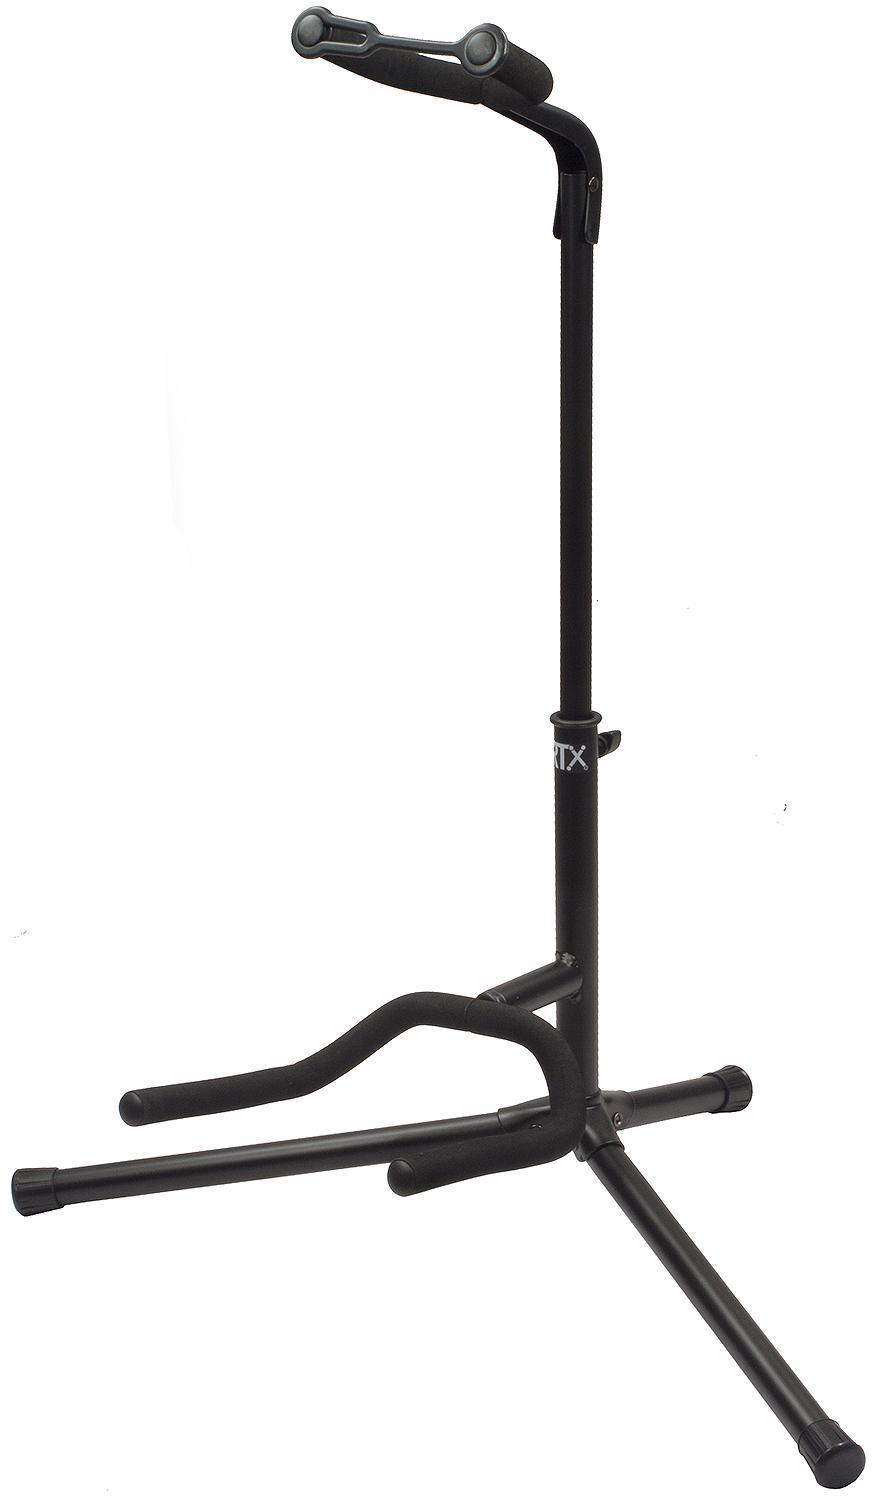 Stand & support guitare & basse Rtx G1NX Stand Guitare universel tête pliable - noir